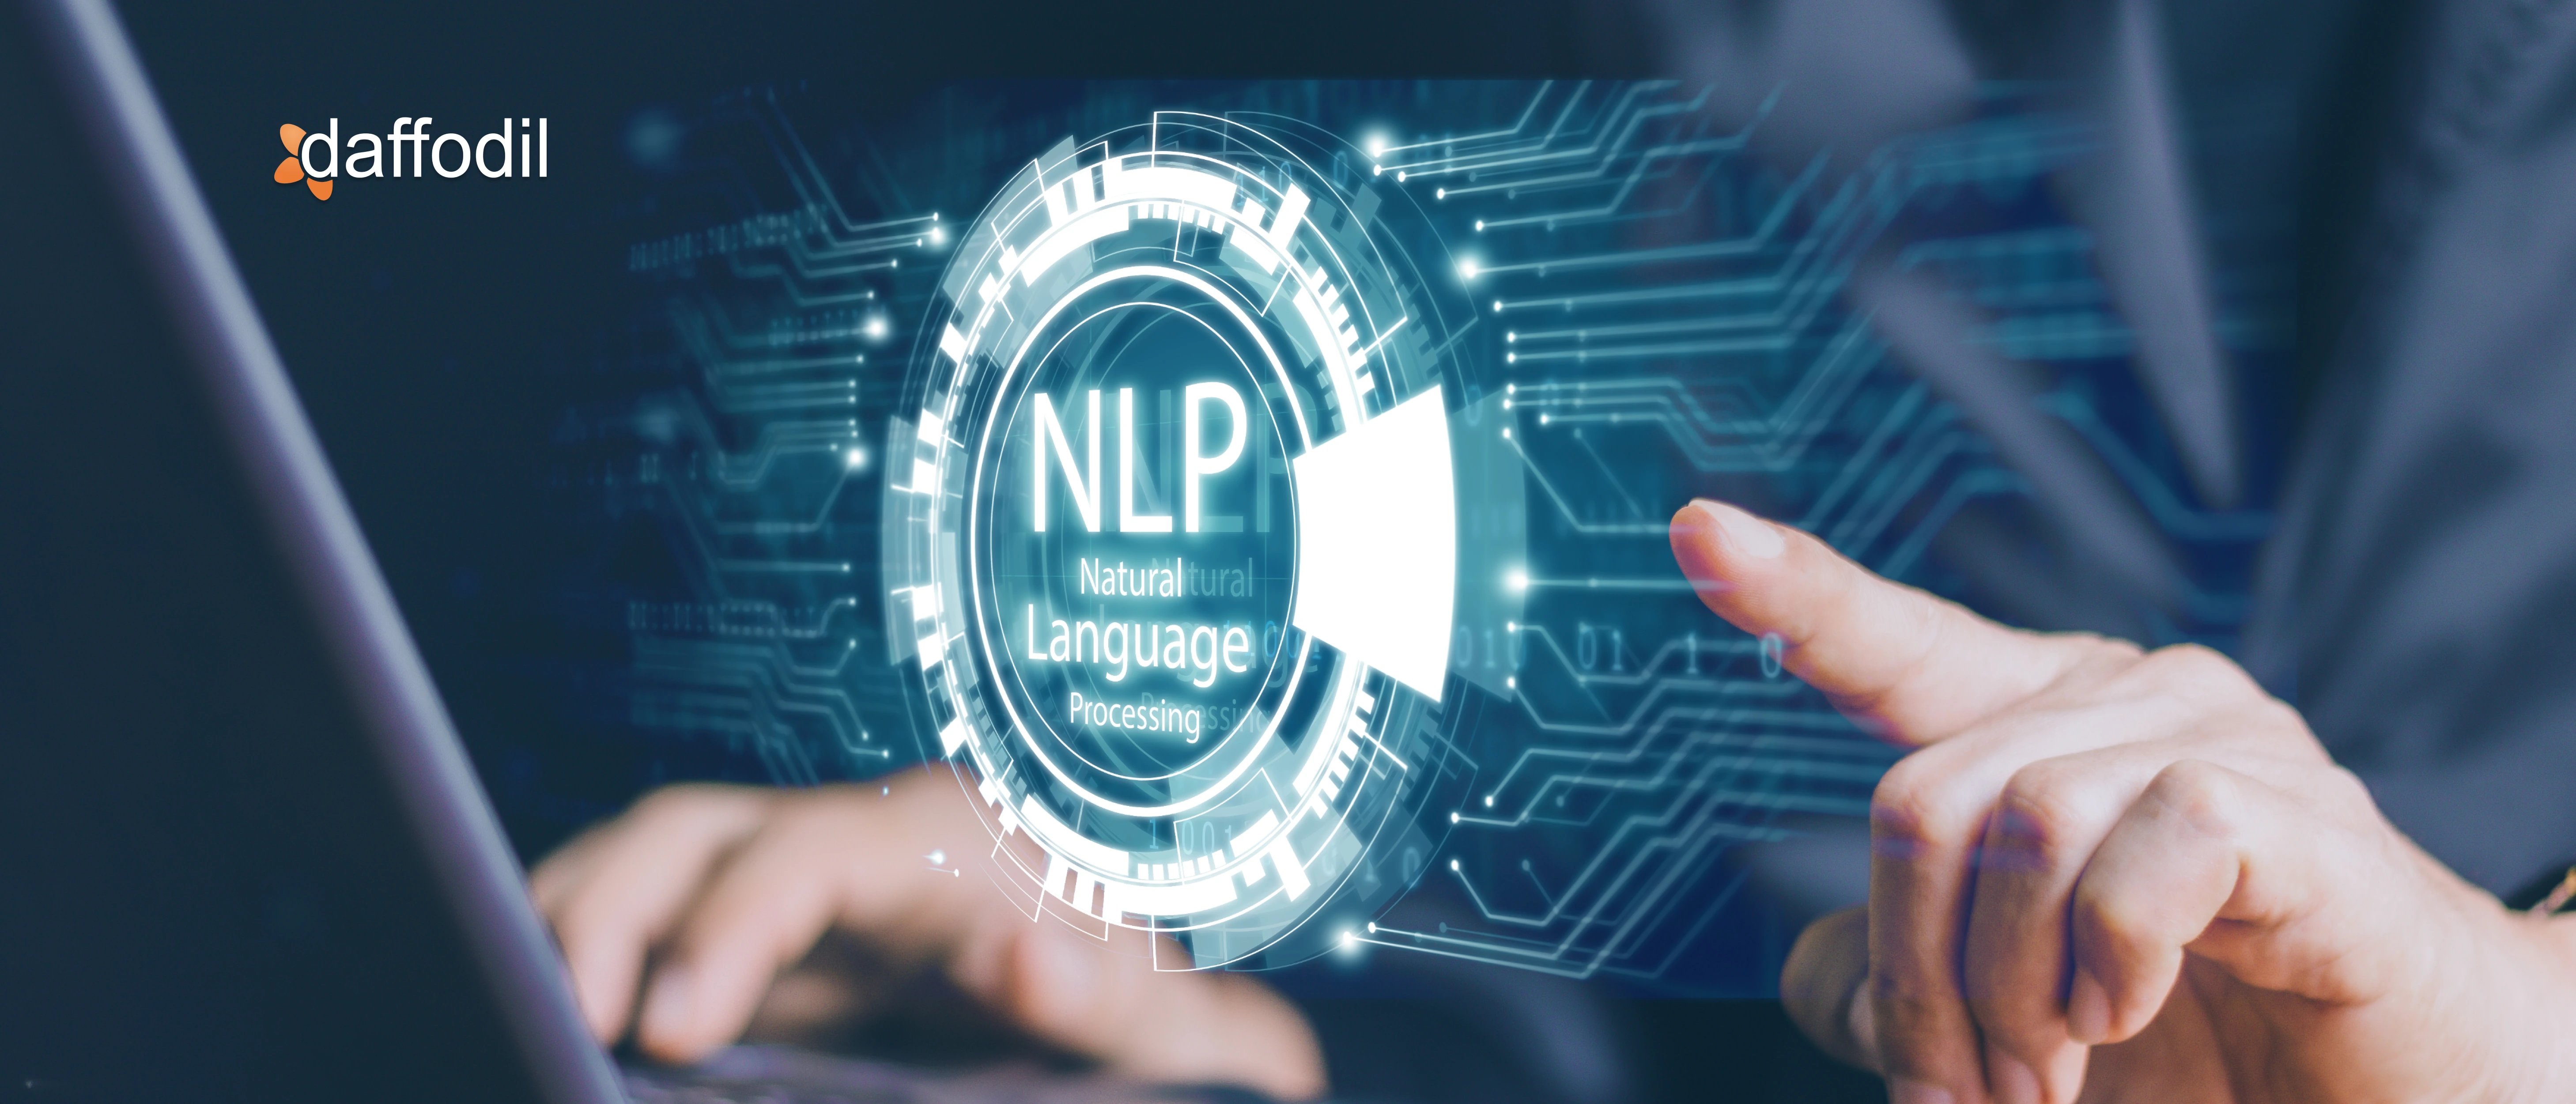 20 NLP Projects with Source Code for NLP Mastery in 2023